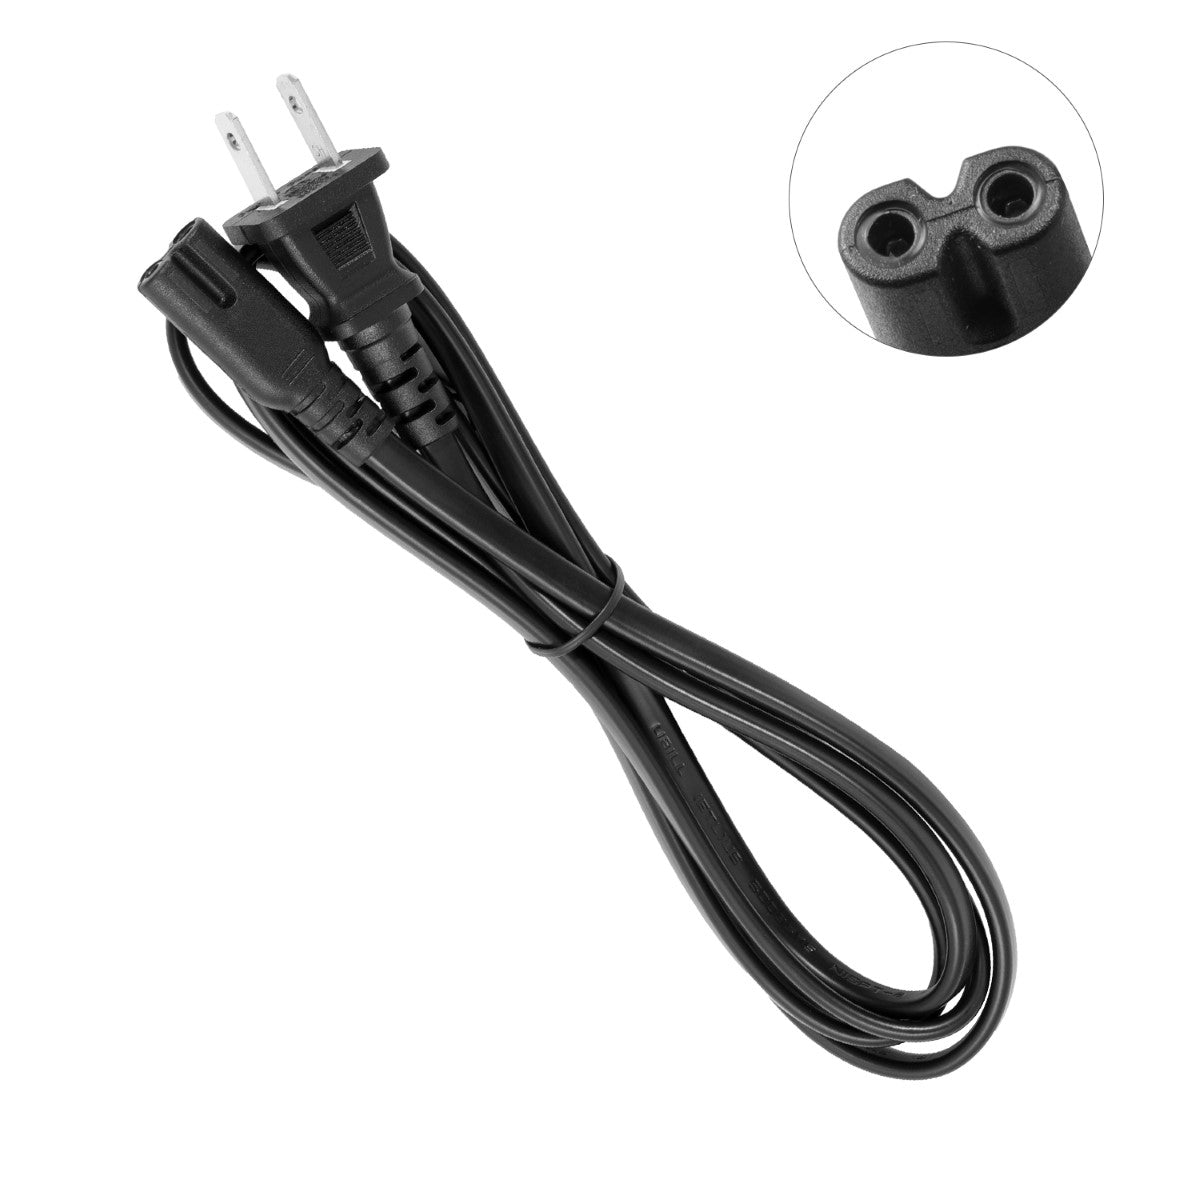 Power Cable for HP Officejet 4622 e-All-in-One Printer.